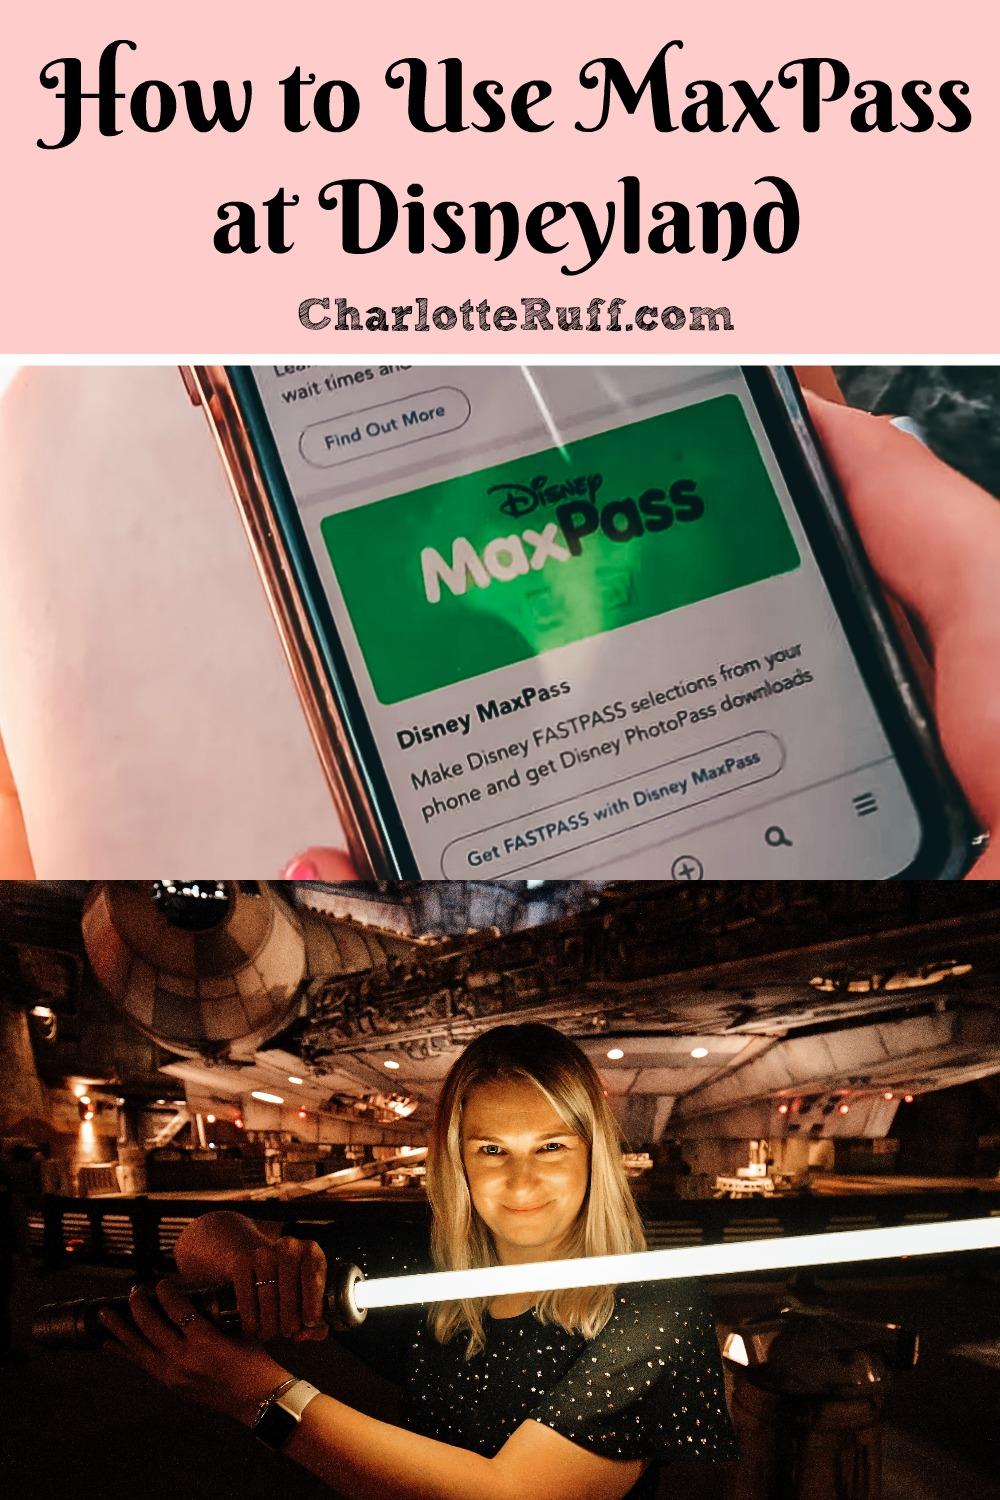 How to use MaxPass at Disneyland for FastPass and unlimited PhotoPass